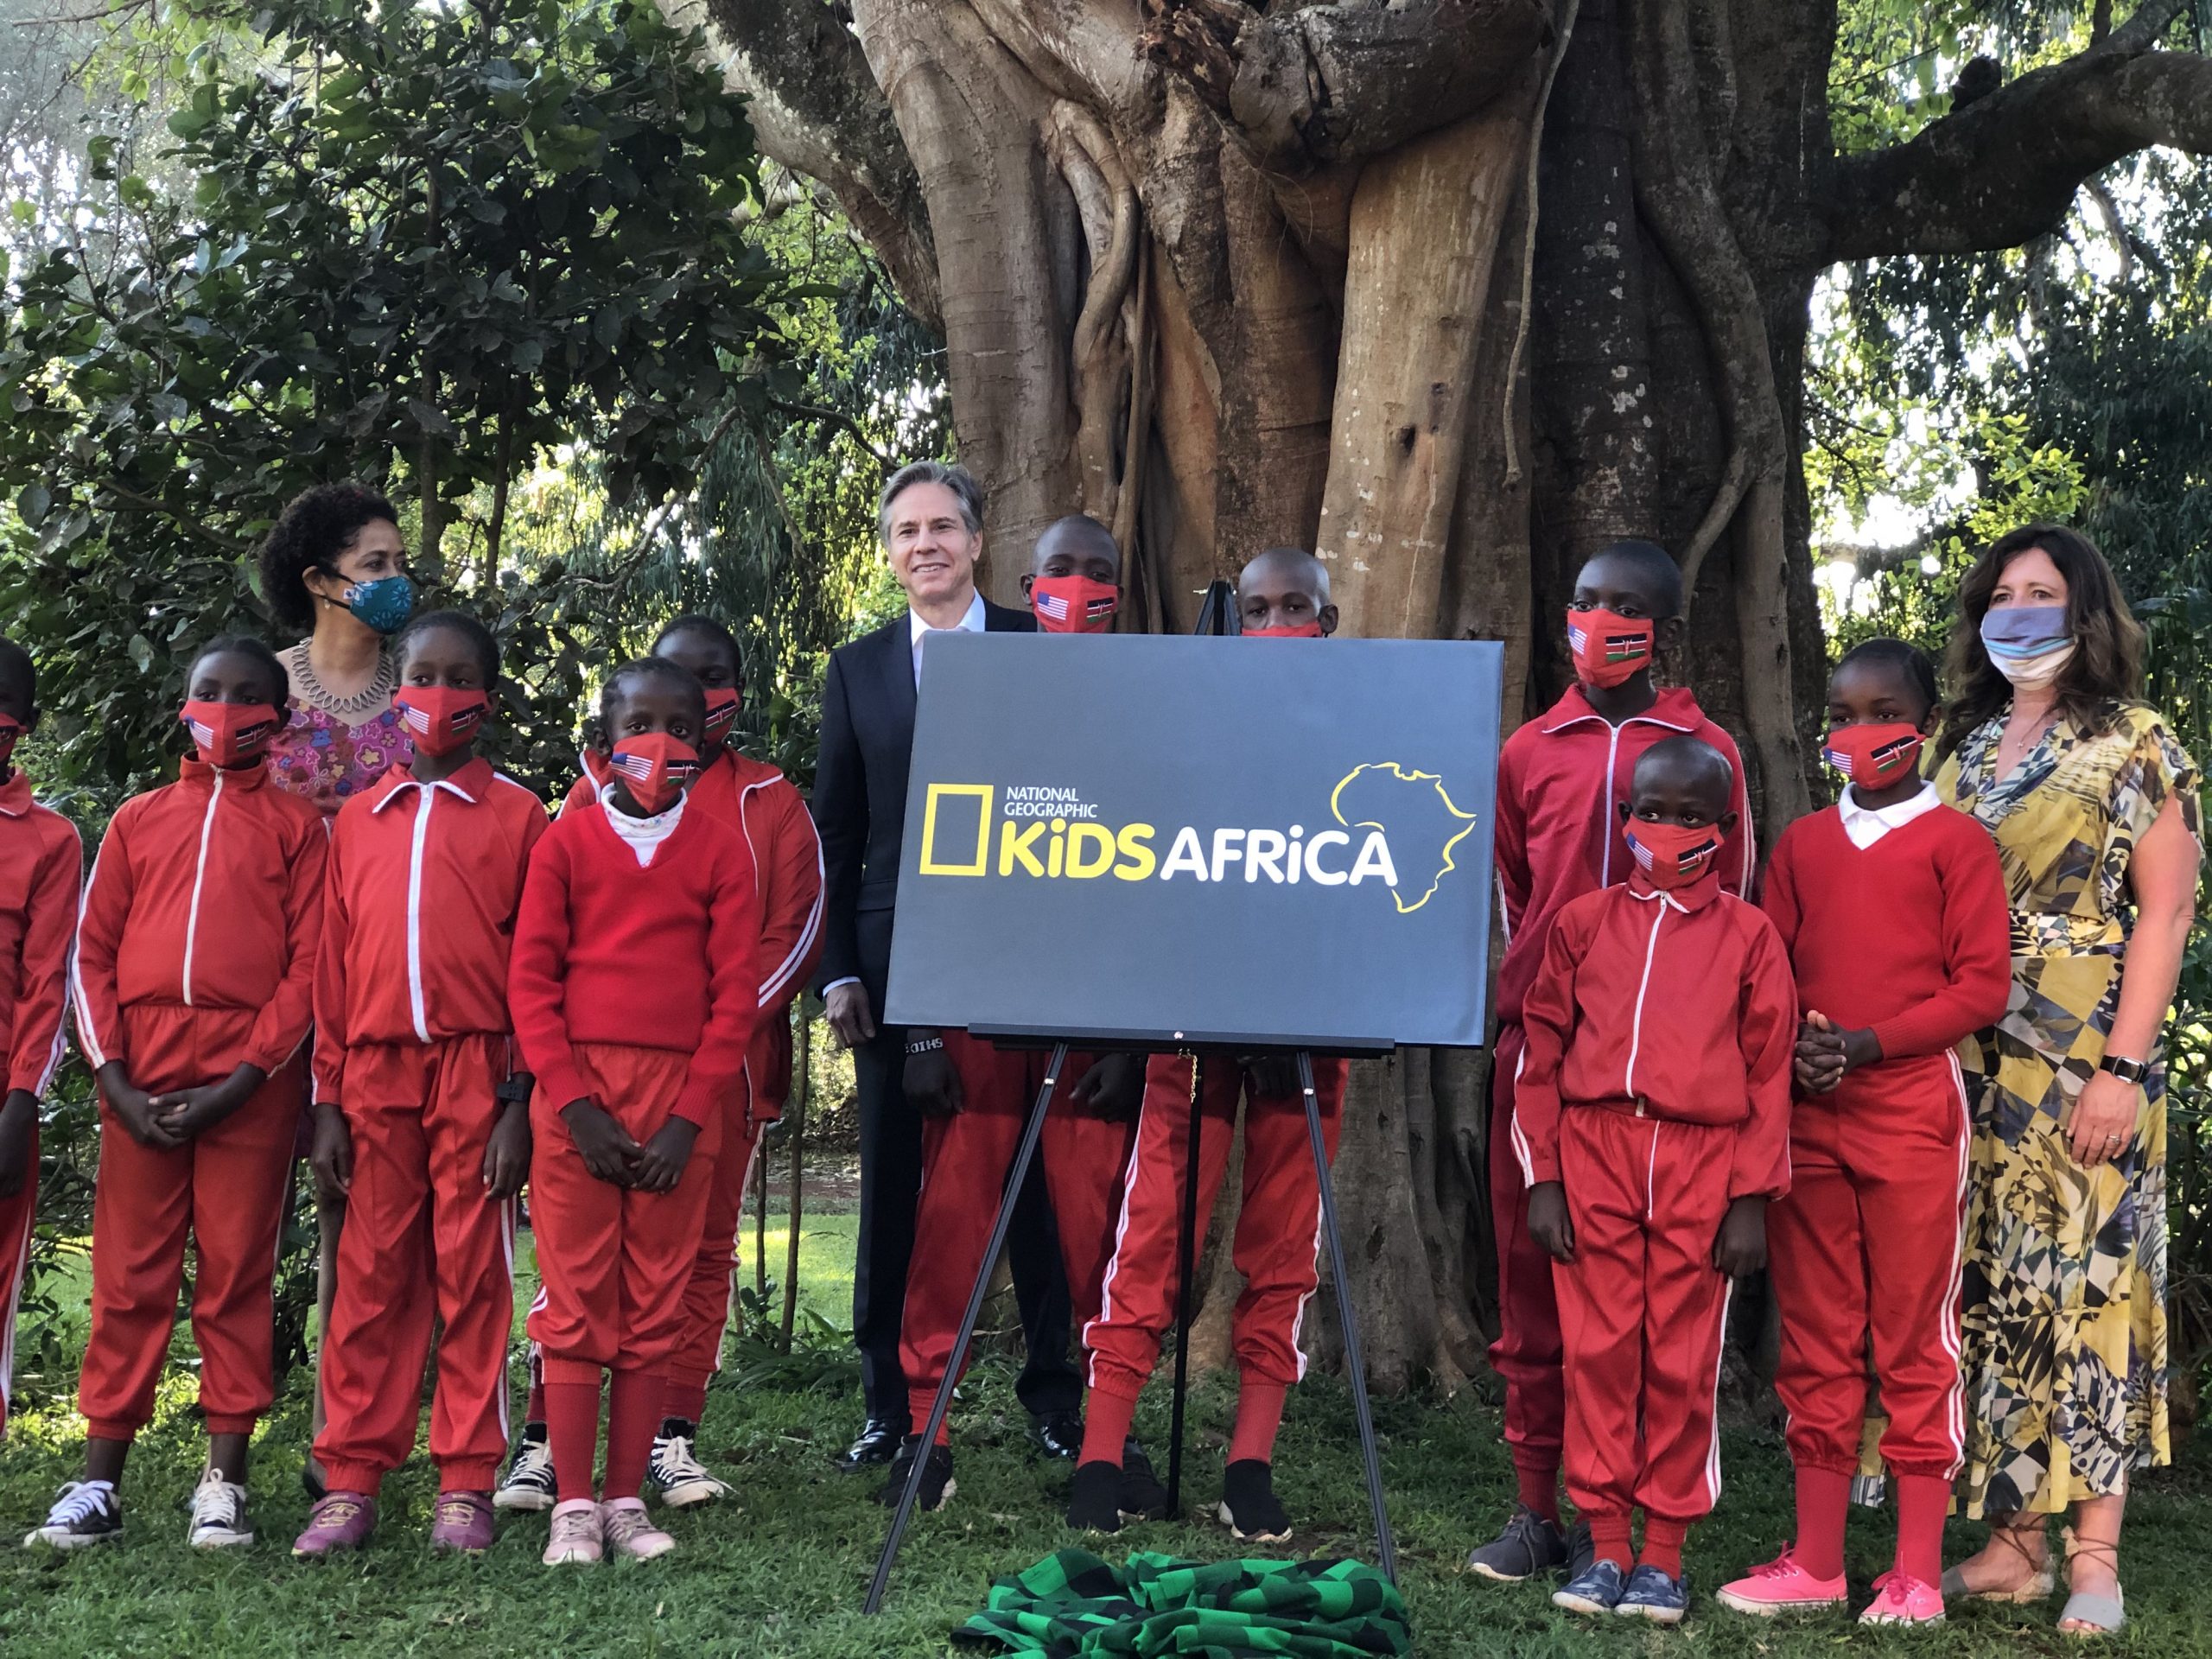 The Walt Disney Company, WildlifeDirect, the U.S. Department of State, and the U.S. Agency for International Development join forces to develop and launch National Geographic Kids Educational Entertainment Programme in Africa